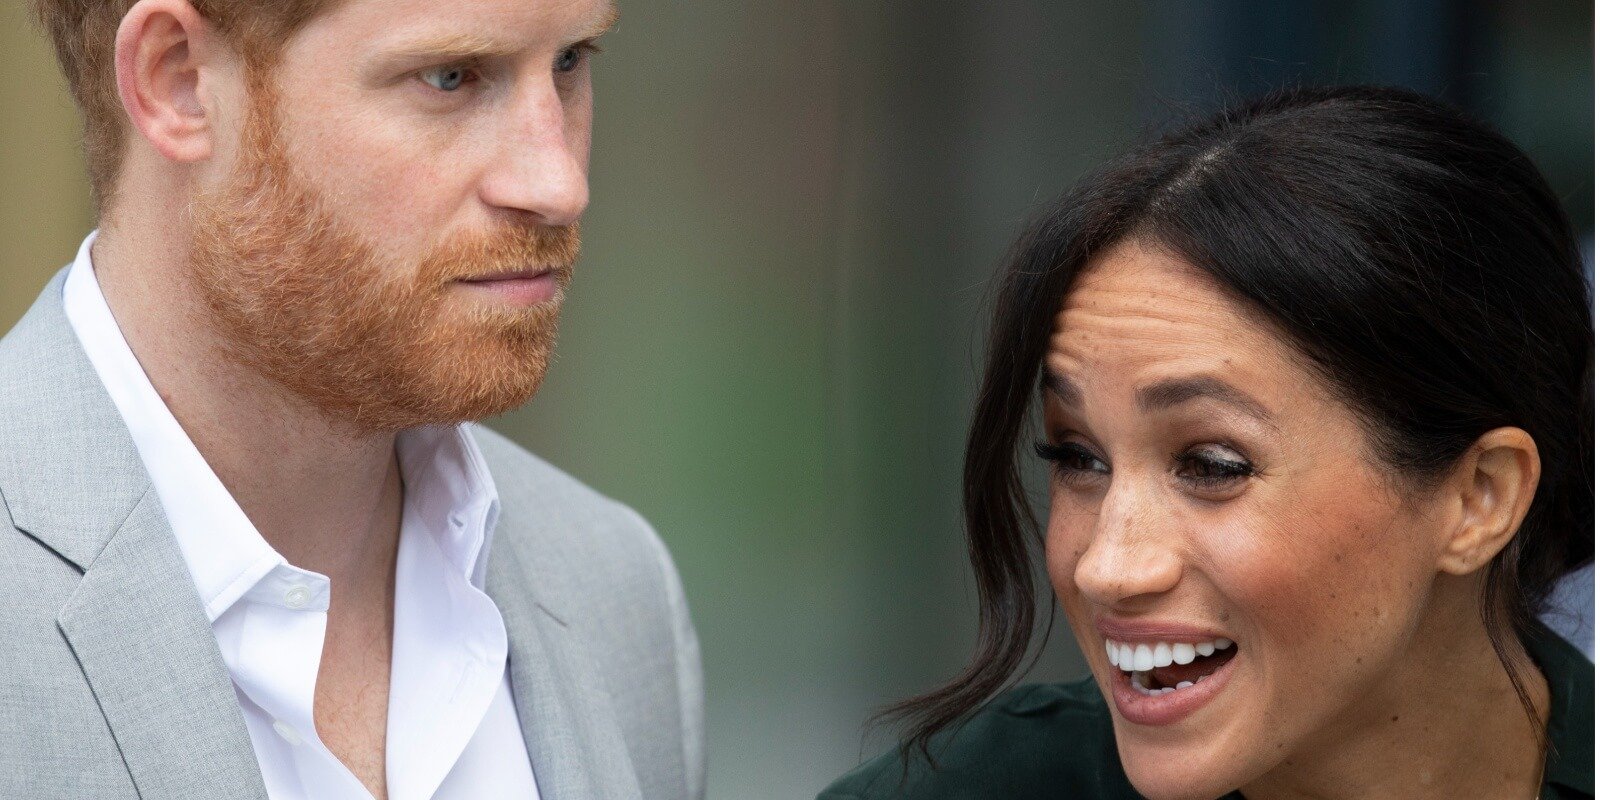 Prince Harry and Meghan Markle photographed on October 3, 2018 in Chichester, United Kingdom.